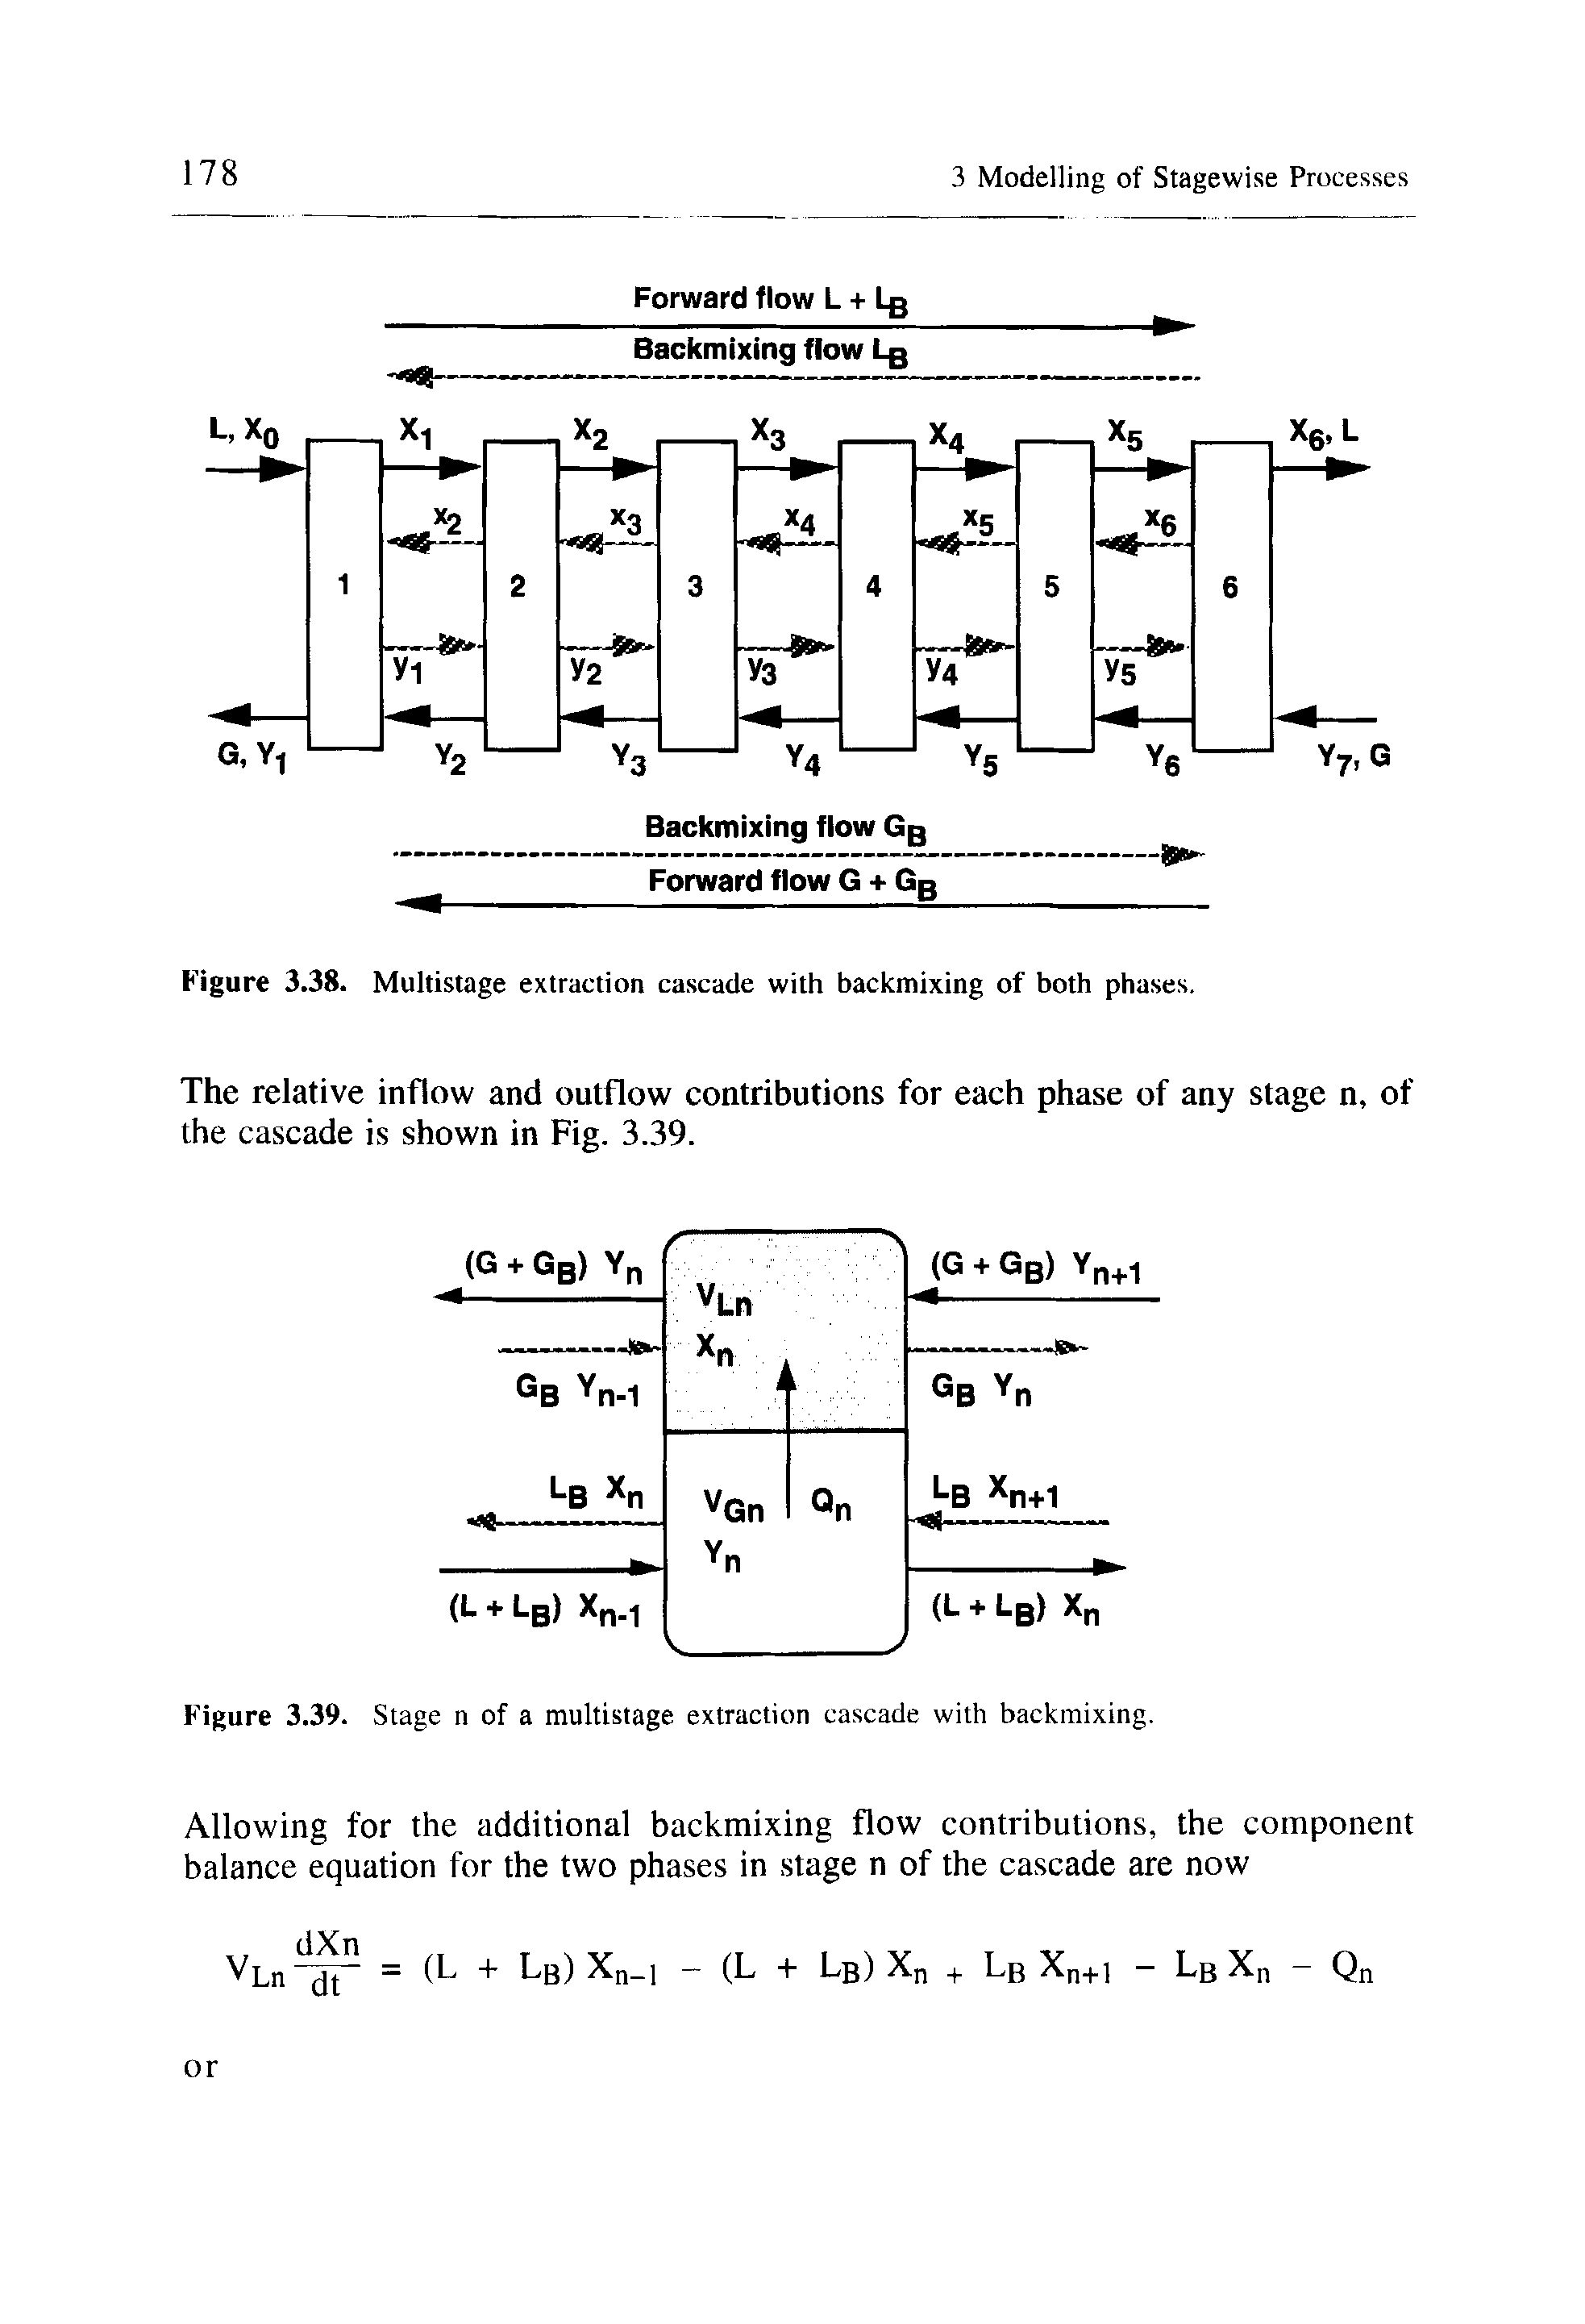 Figure 3.38. Multistage extraction cascade with backmixing of both phases.